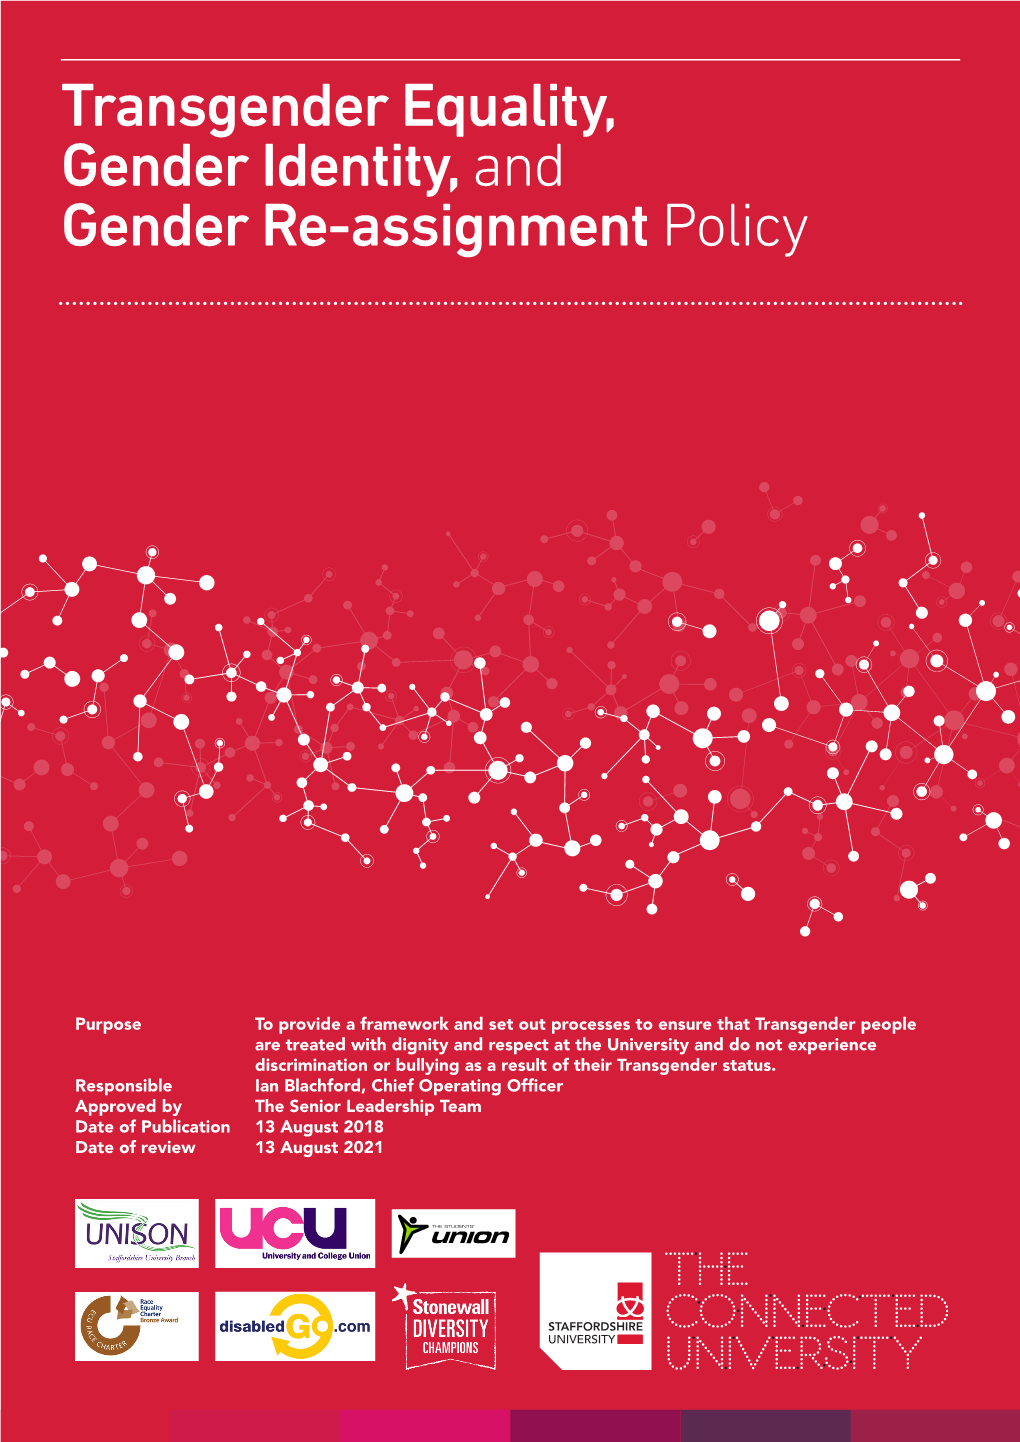 Transgender Equality, Gender Identity, and Gender Re-Assignment Policy